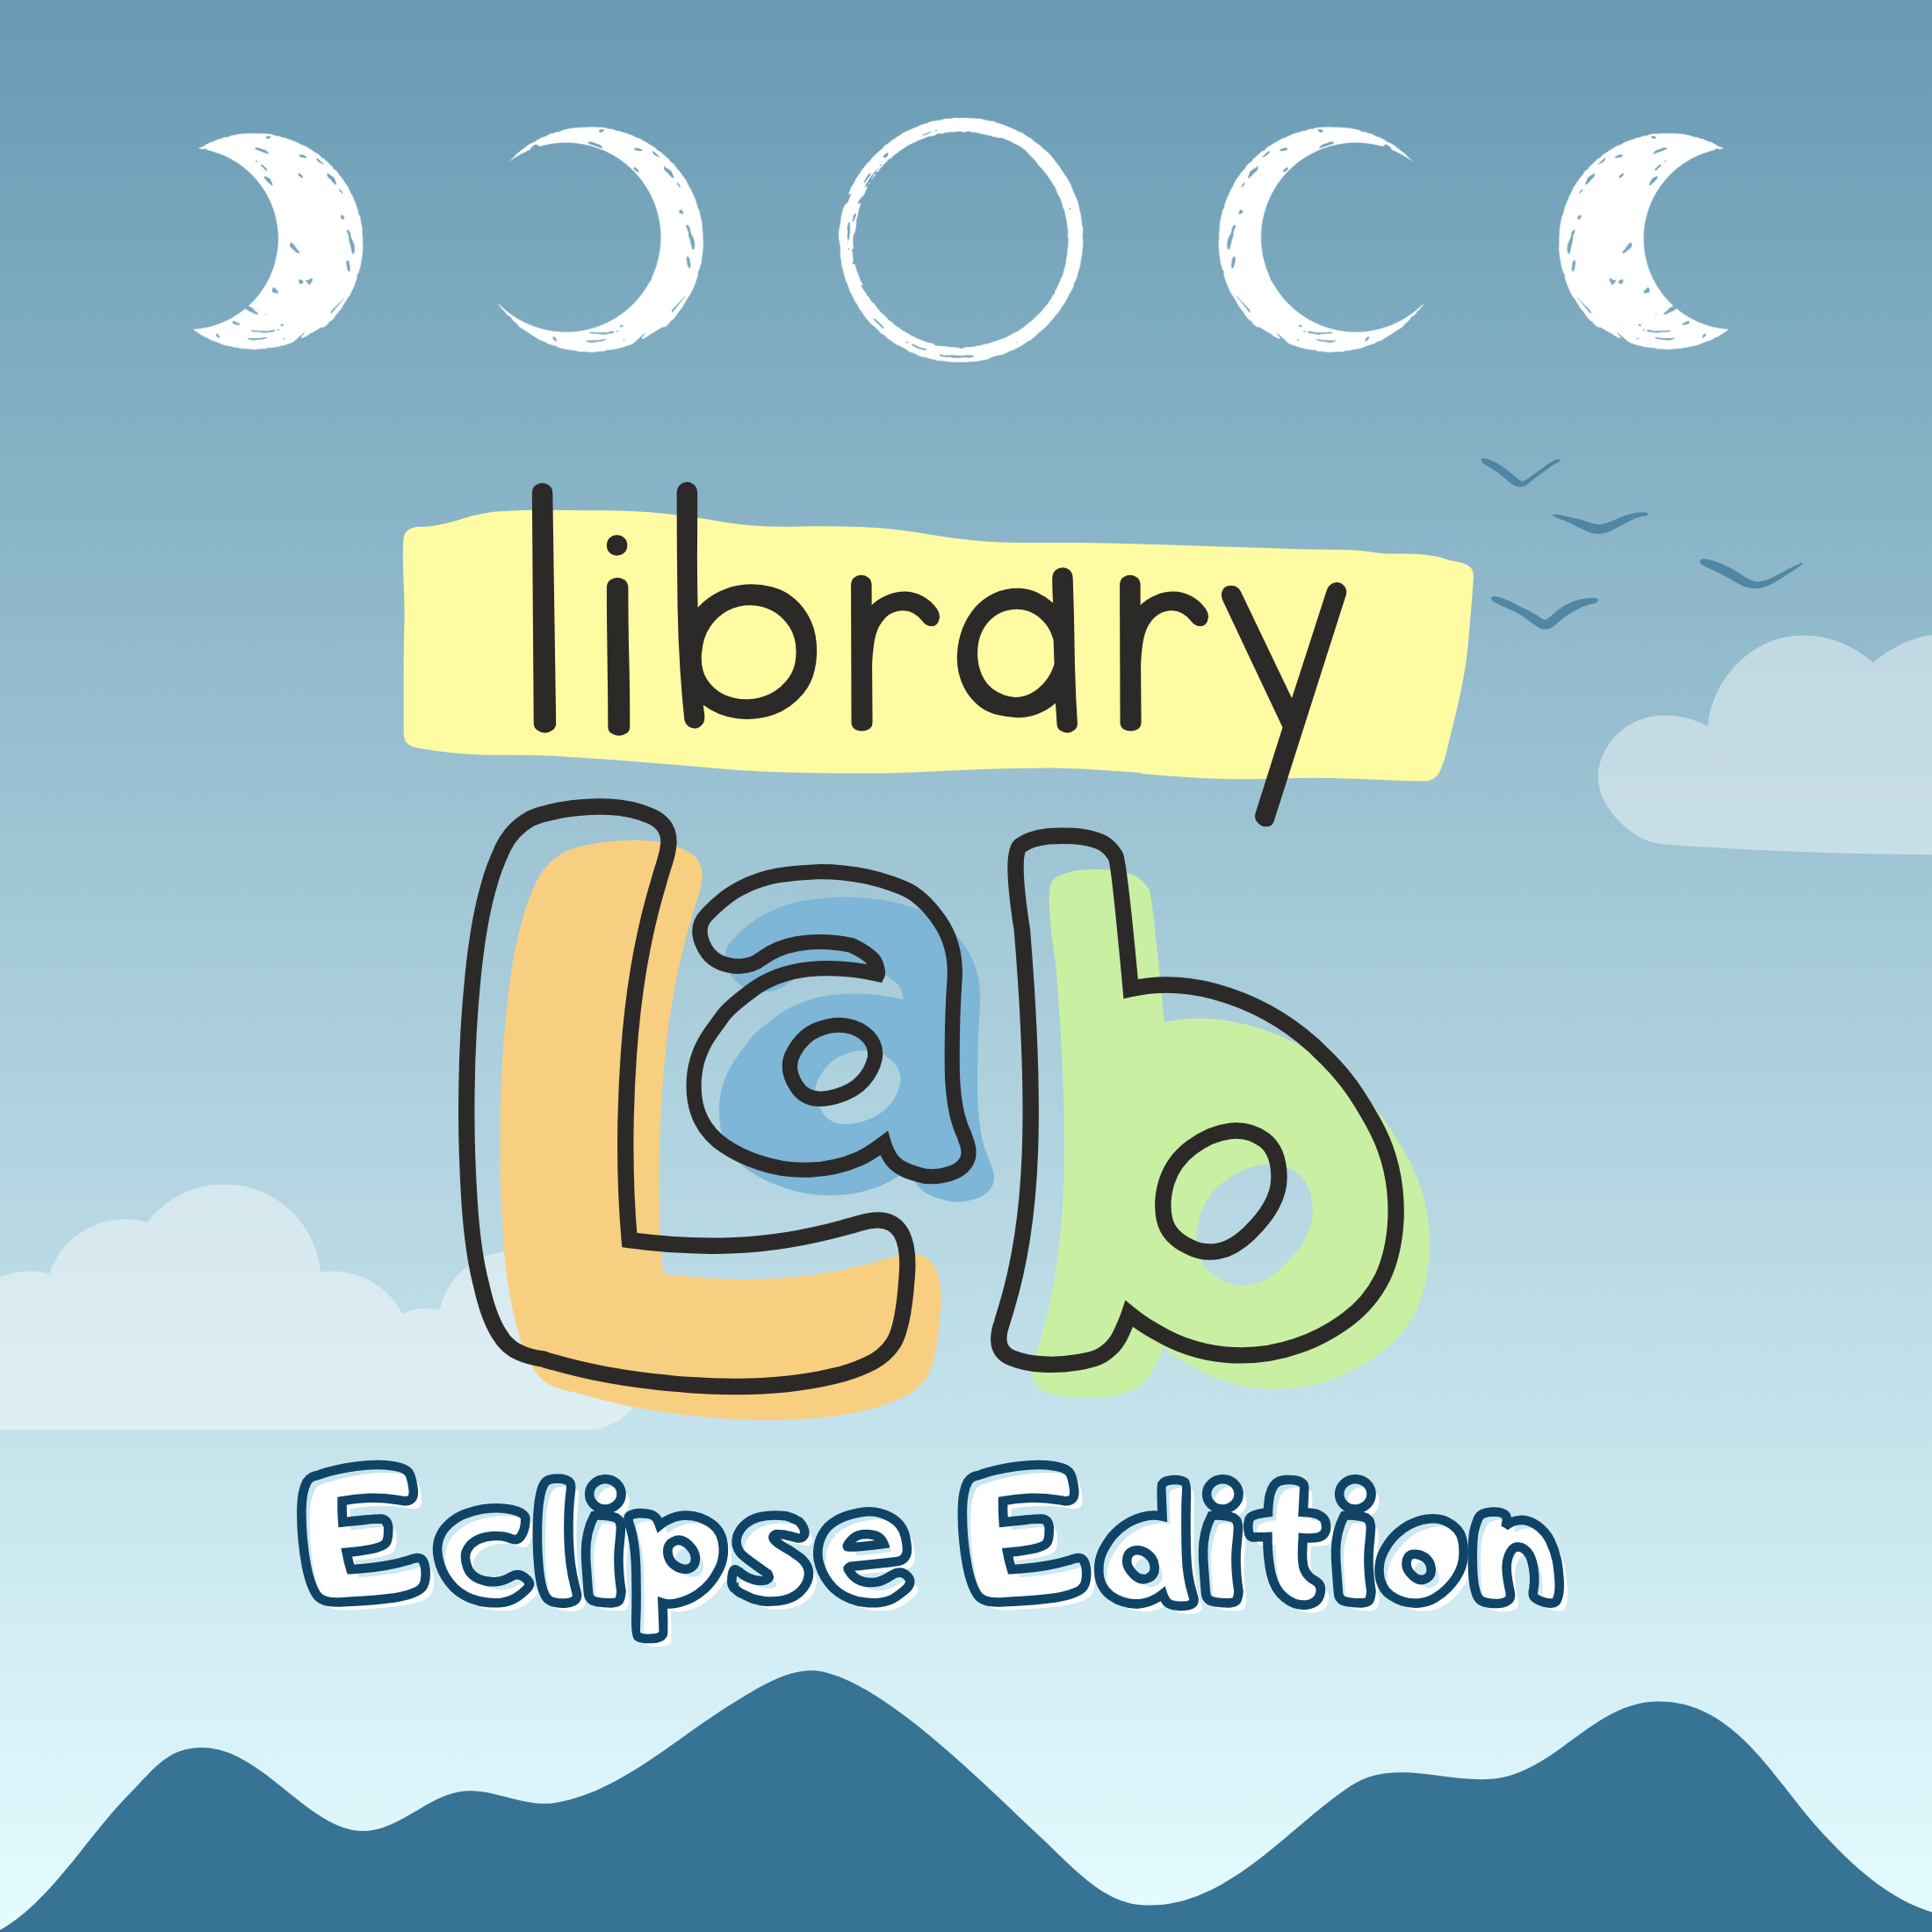 library lab eclipse